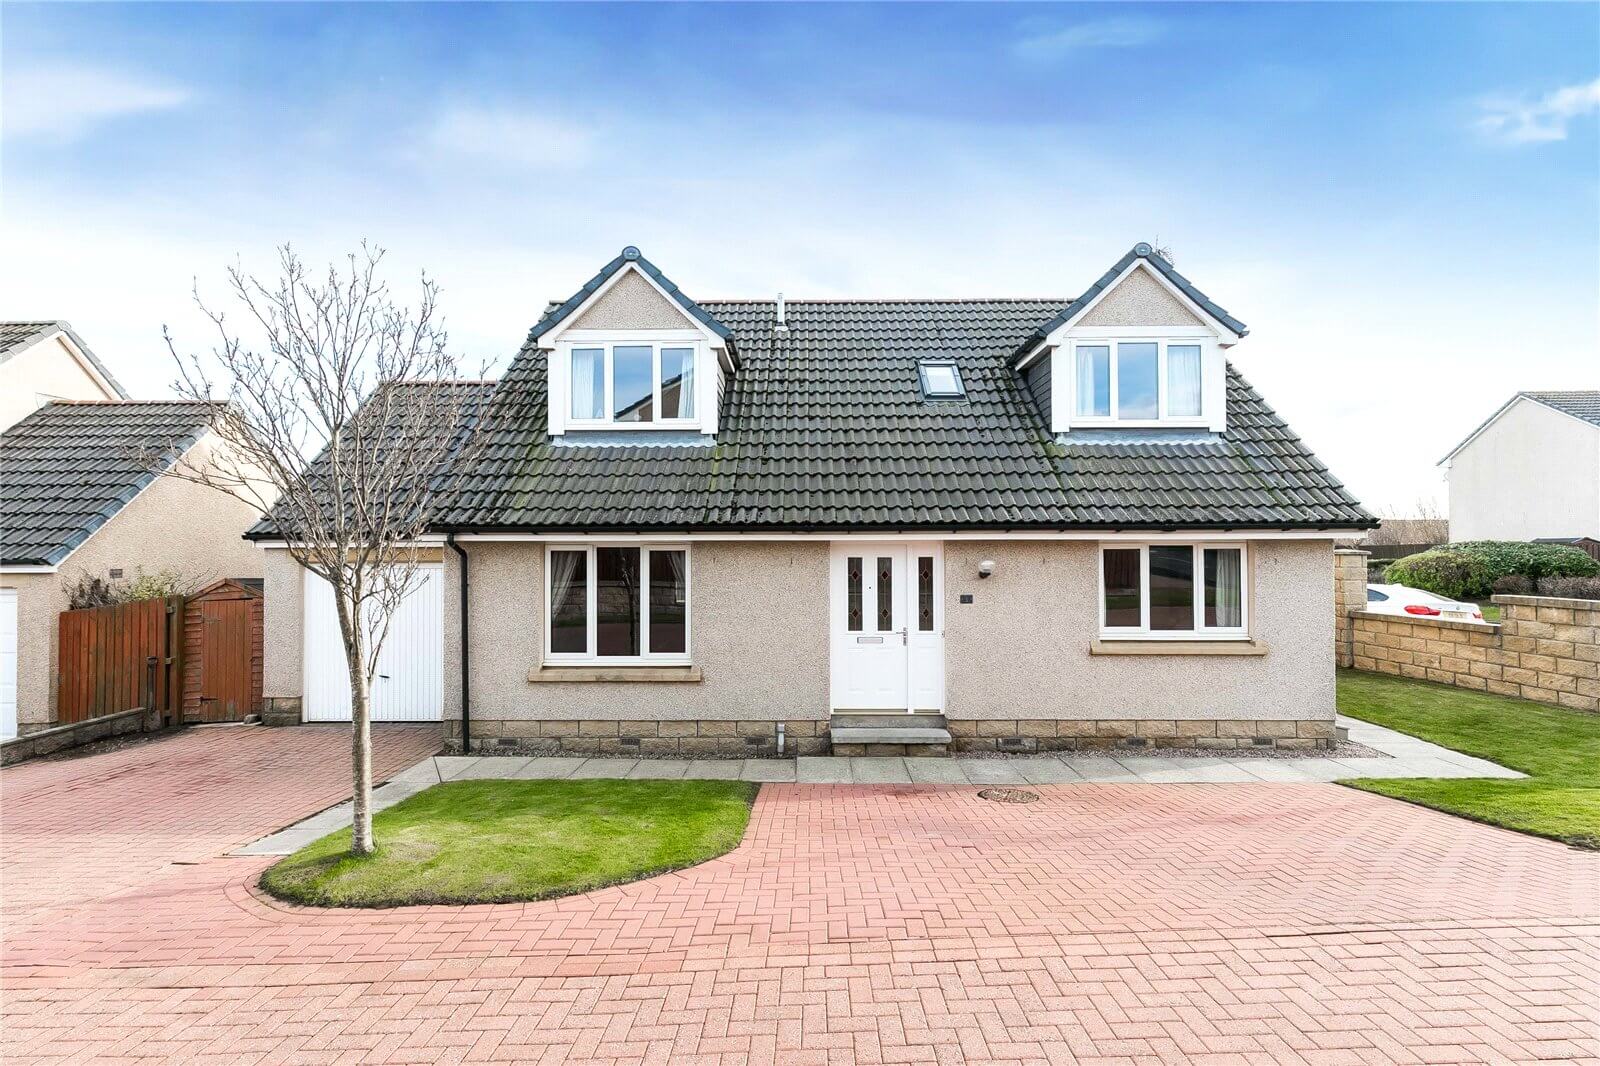 Our latest properties for sale and to let (13th March 2020)